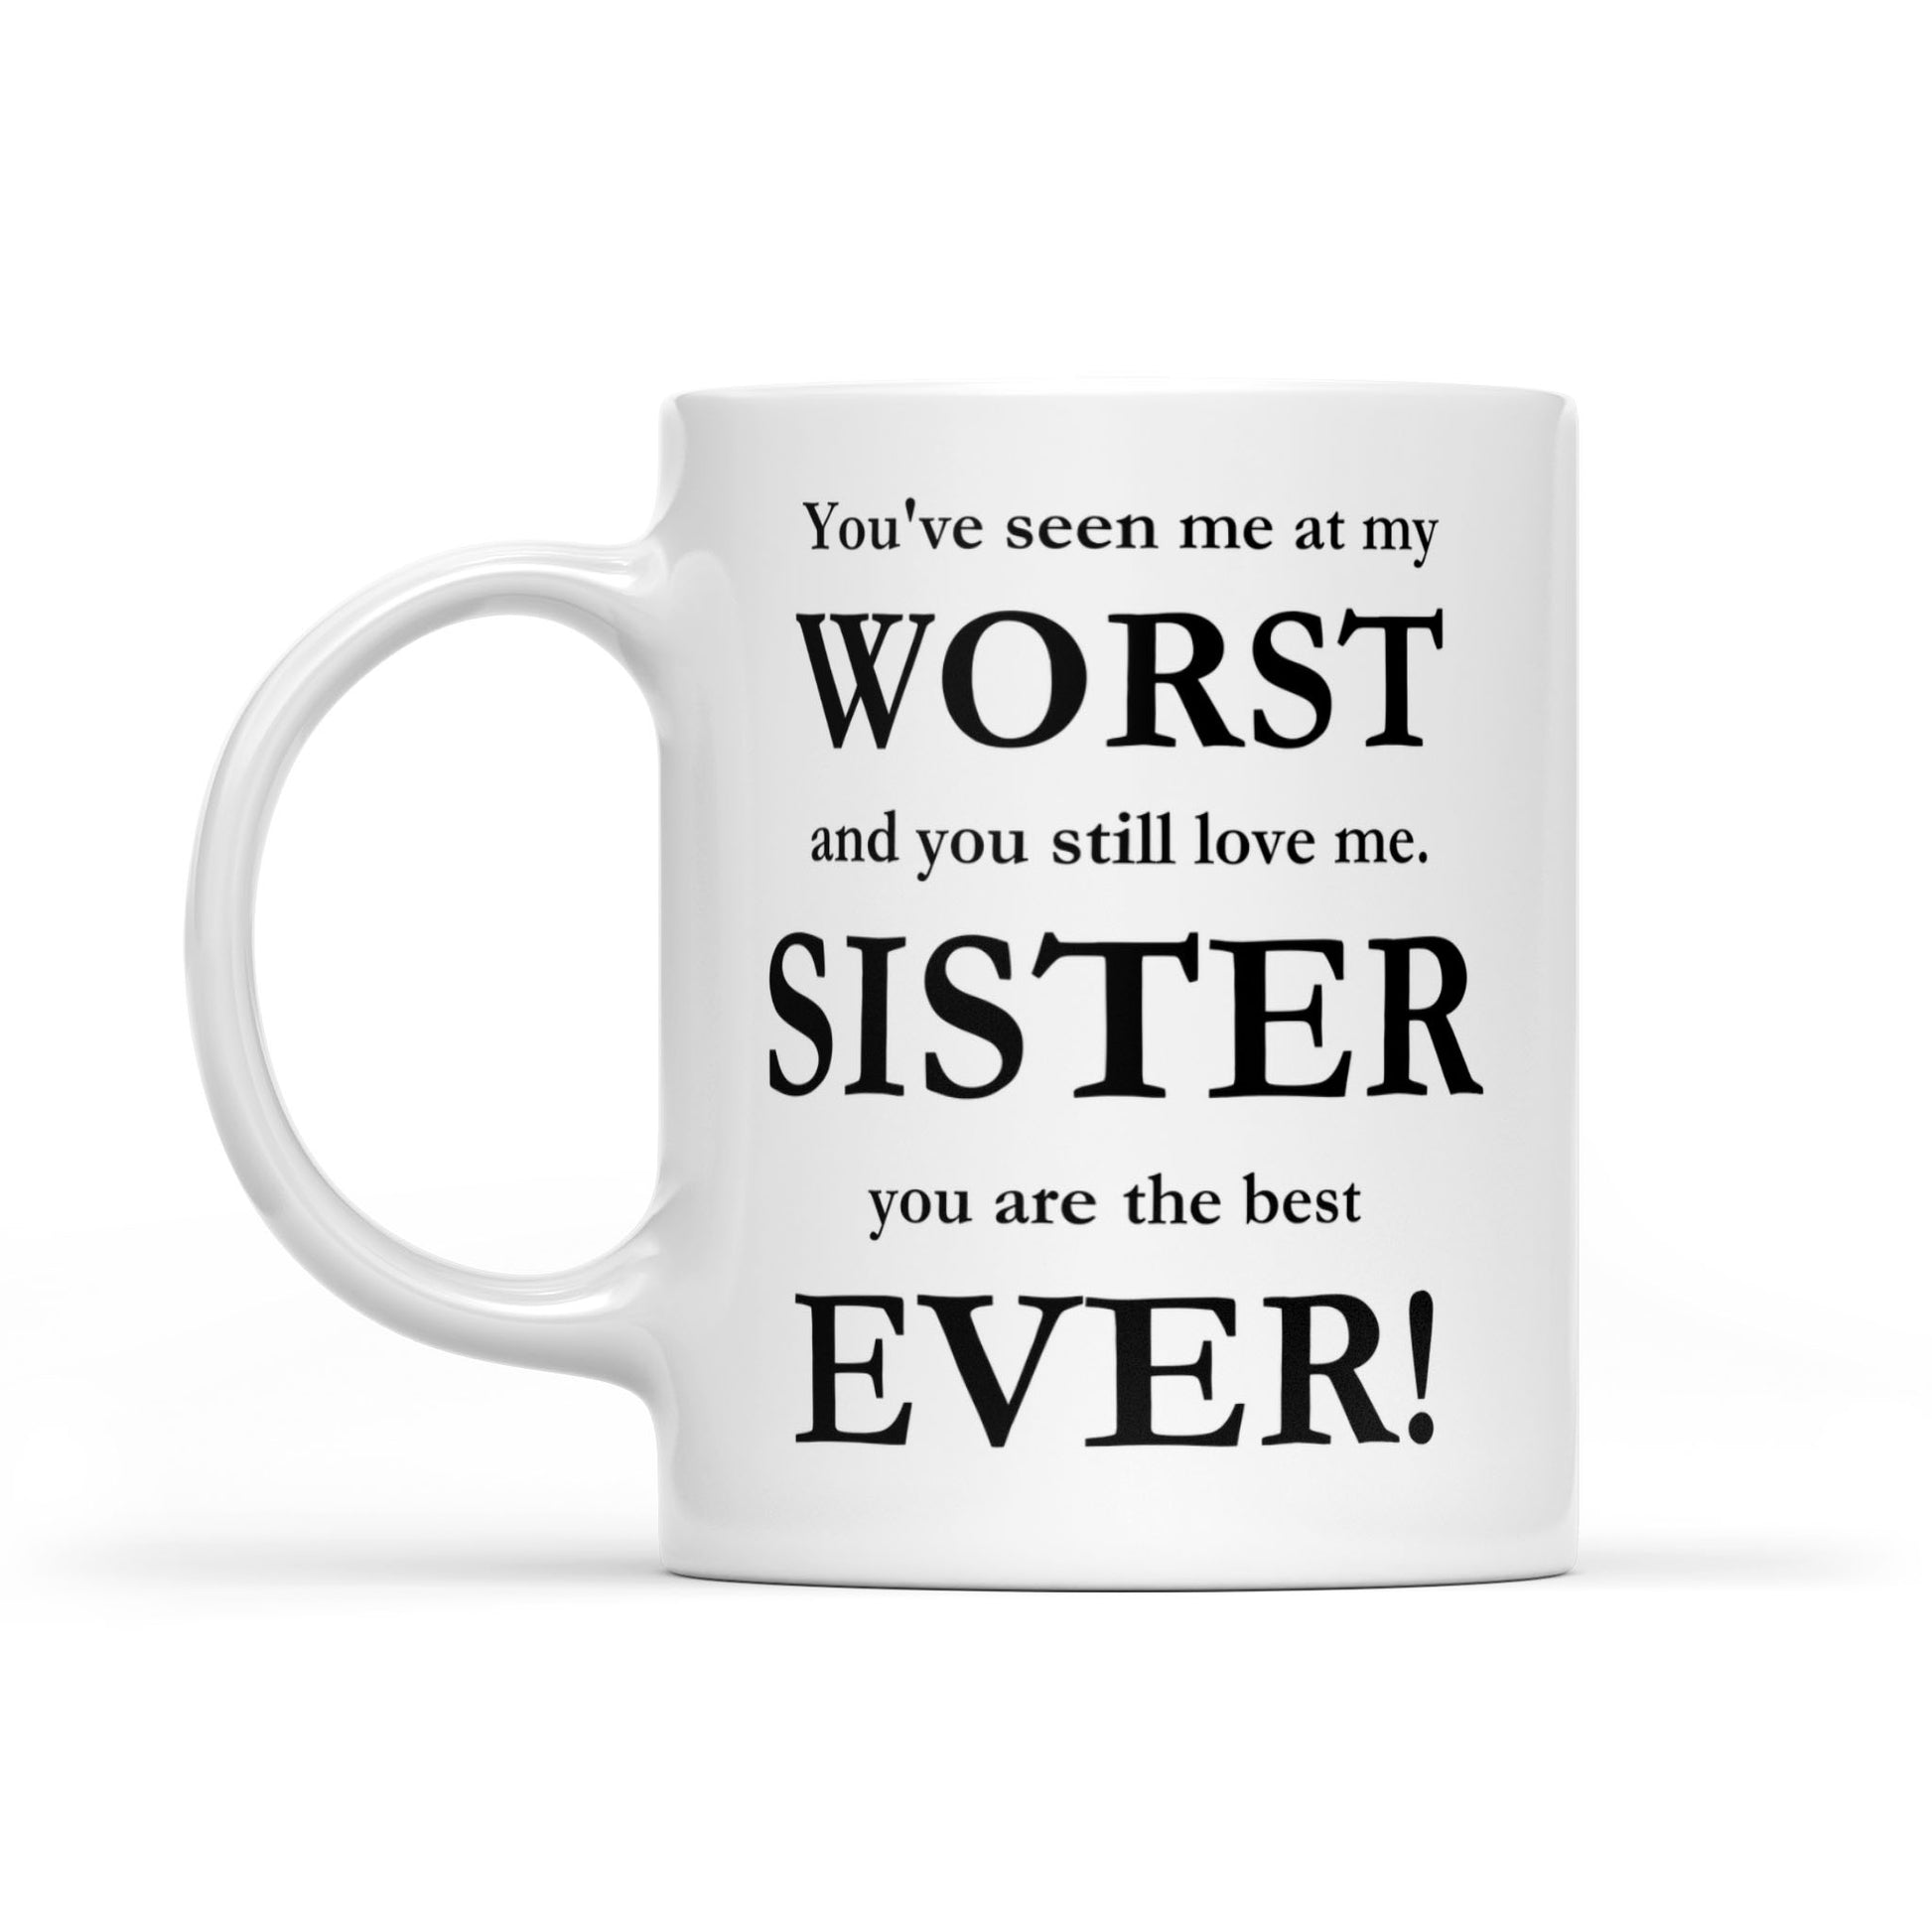 You Have Seen Me At My Worst Mug for Sister